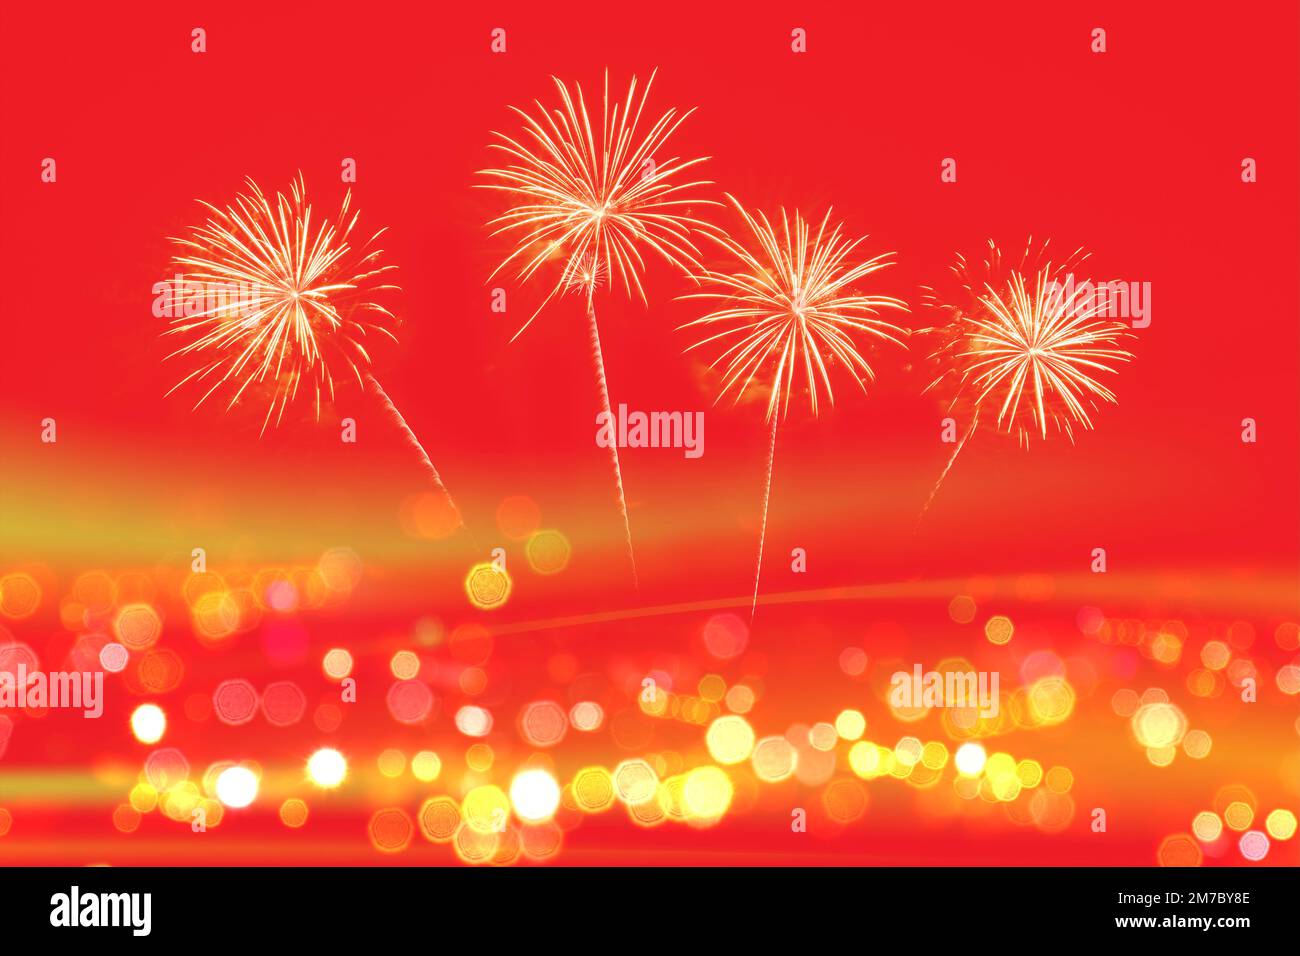 Gold fireworks celebration on red background with copy space for Chinese new year celebration. Stock Photo